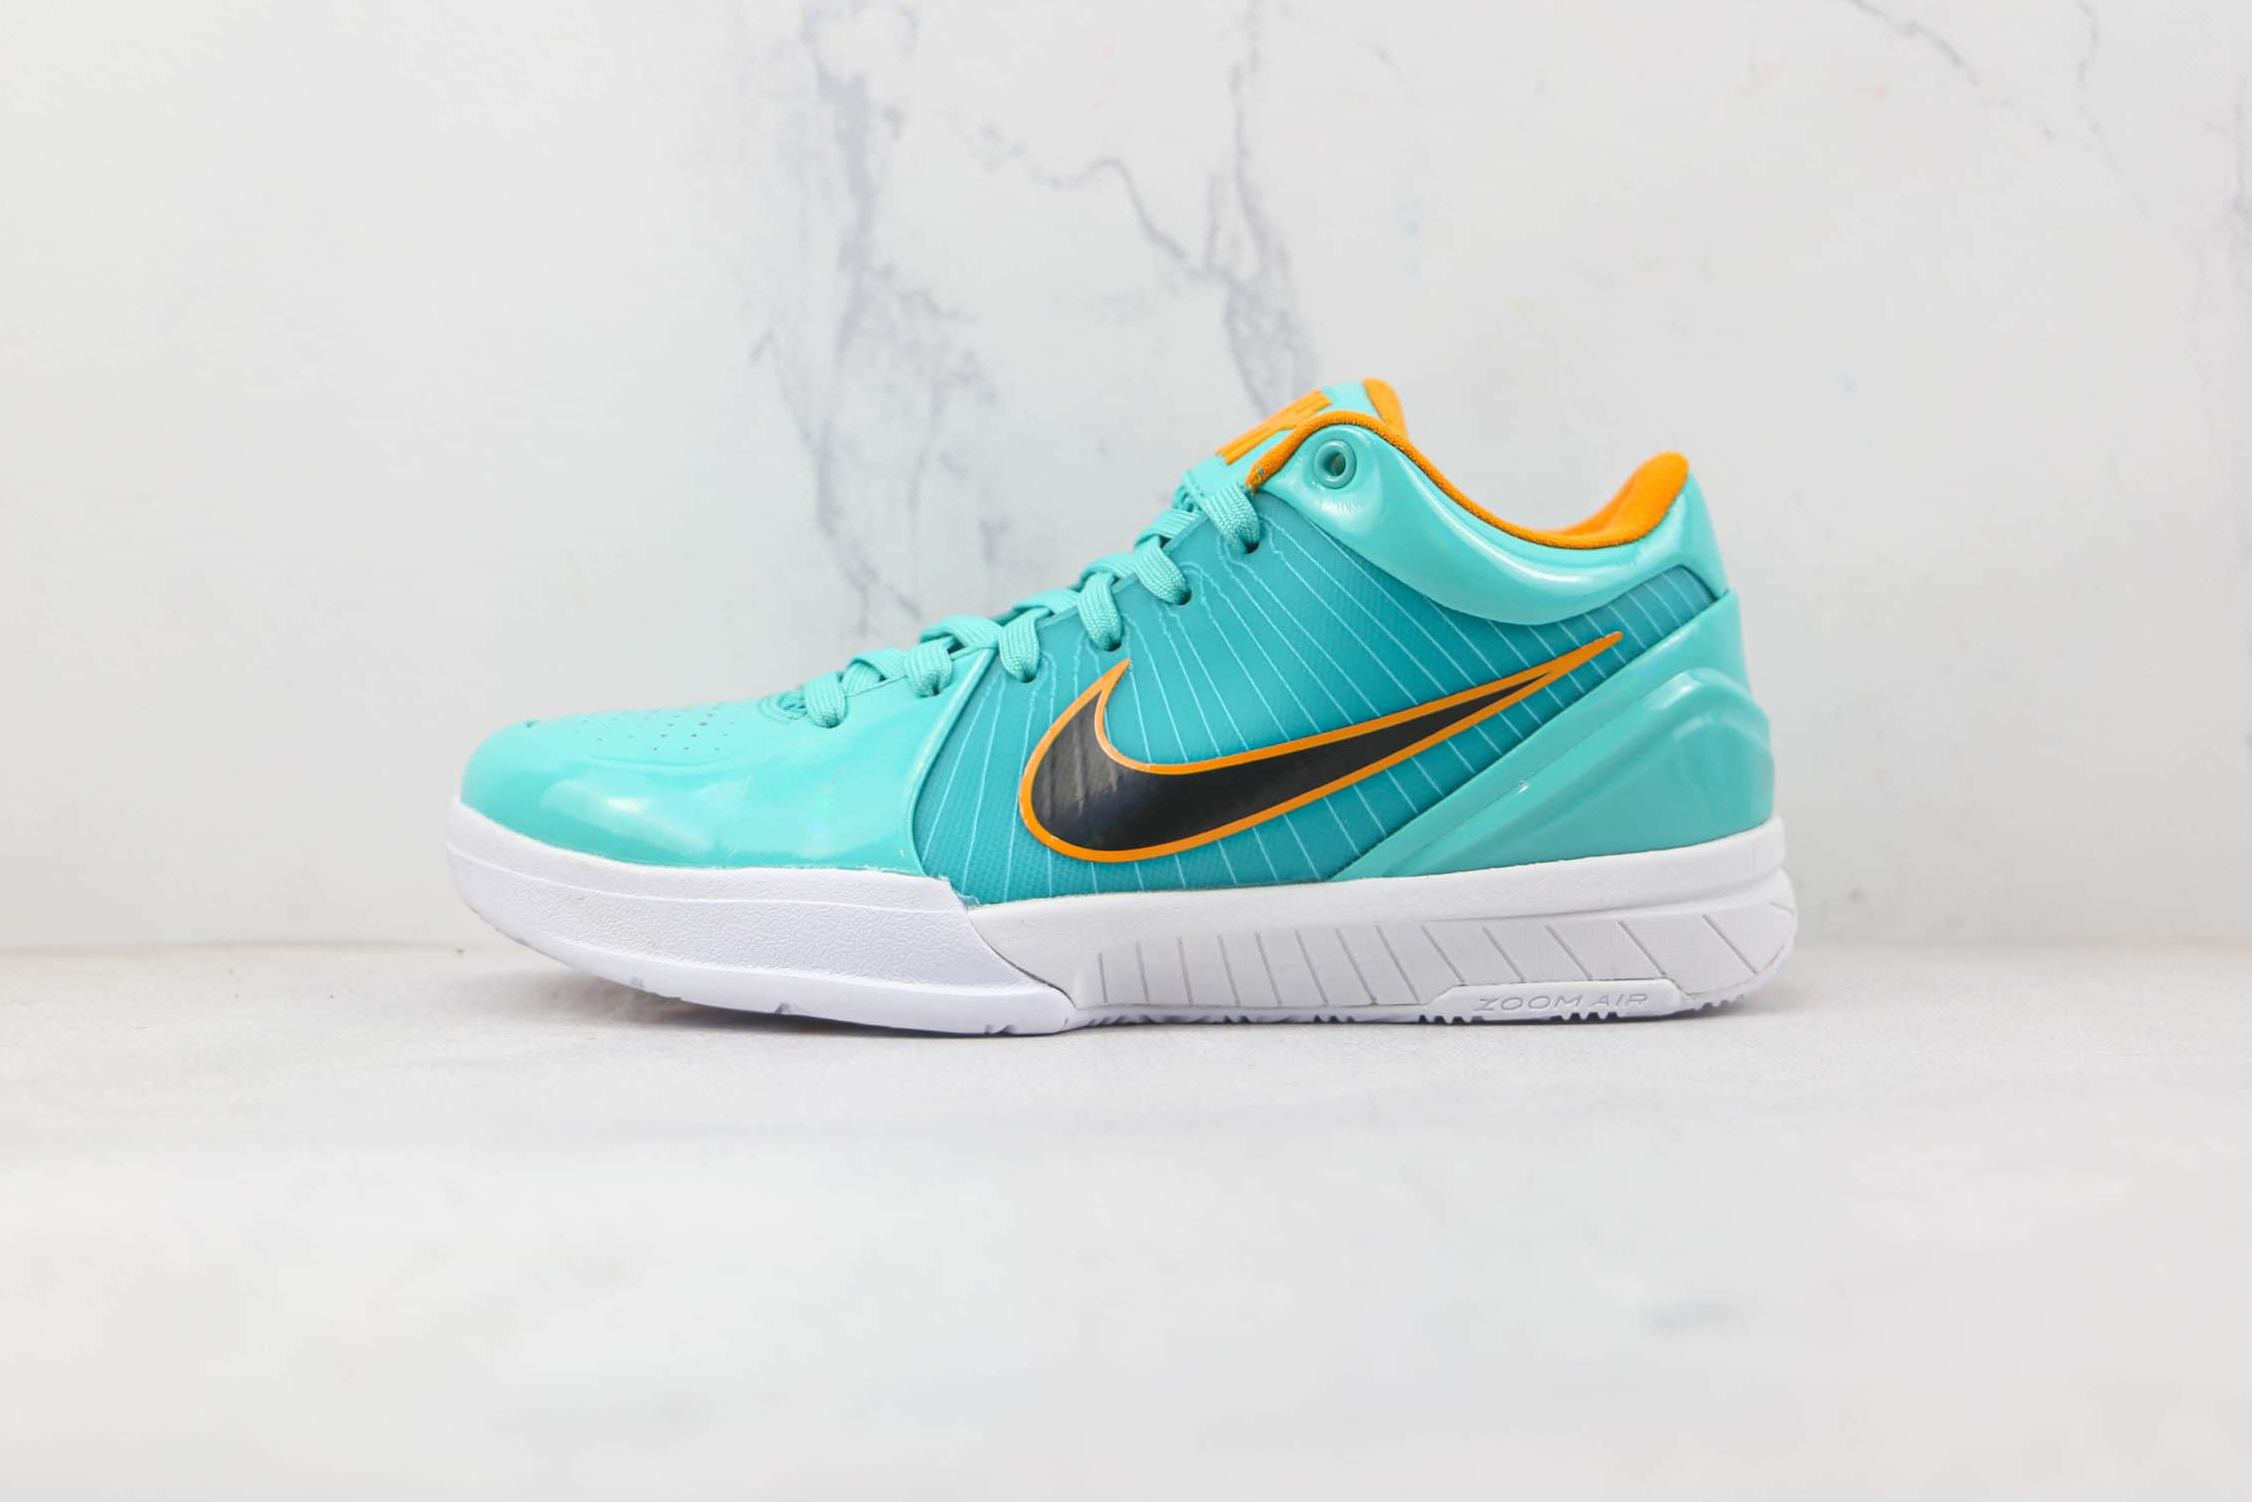 Nike Undefeated x Kobe 4 Protro 'Hyper Jade' CQ3869-300 - Shop the Exclusive Collaboration